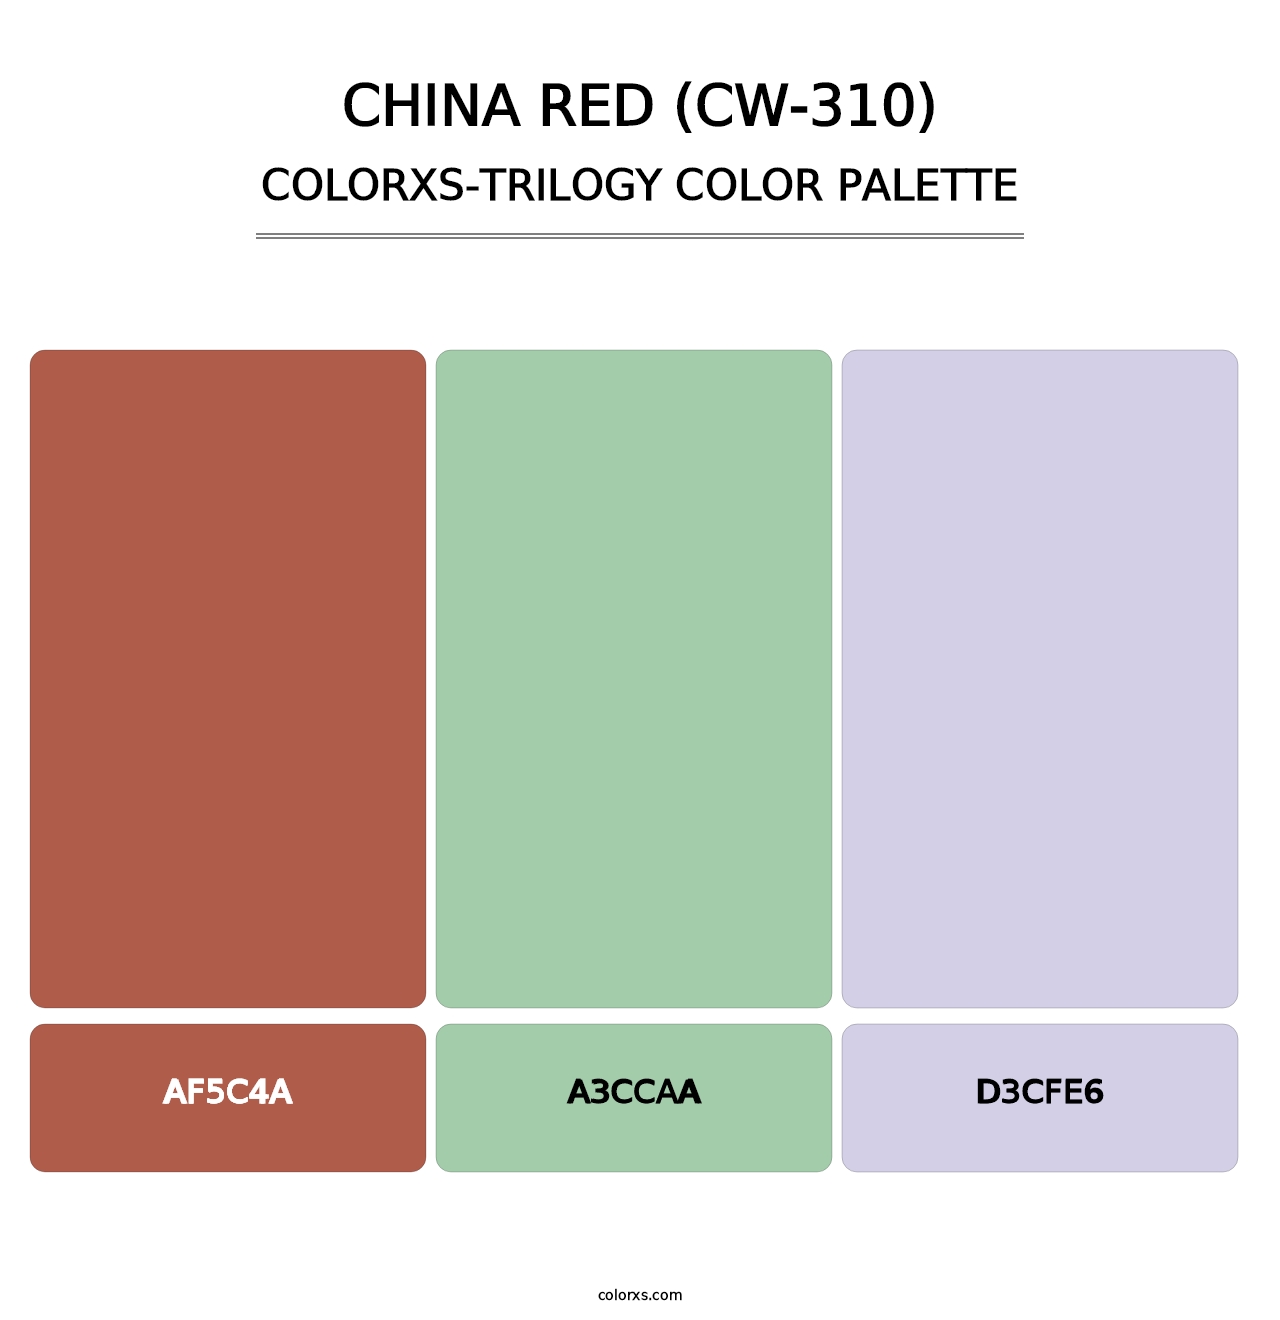 China Red (CW-310) - Colorxs Trilogy Palette